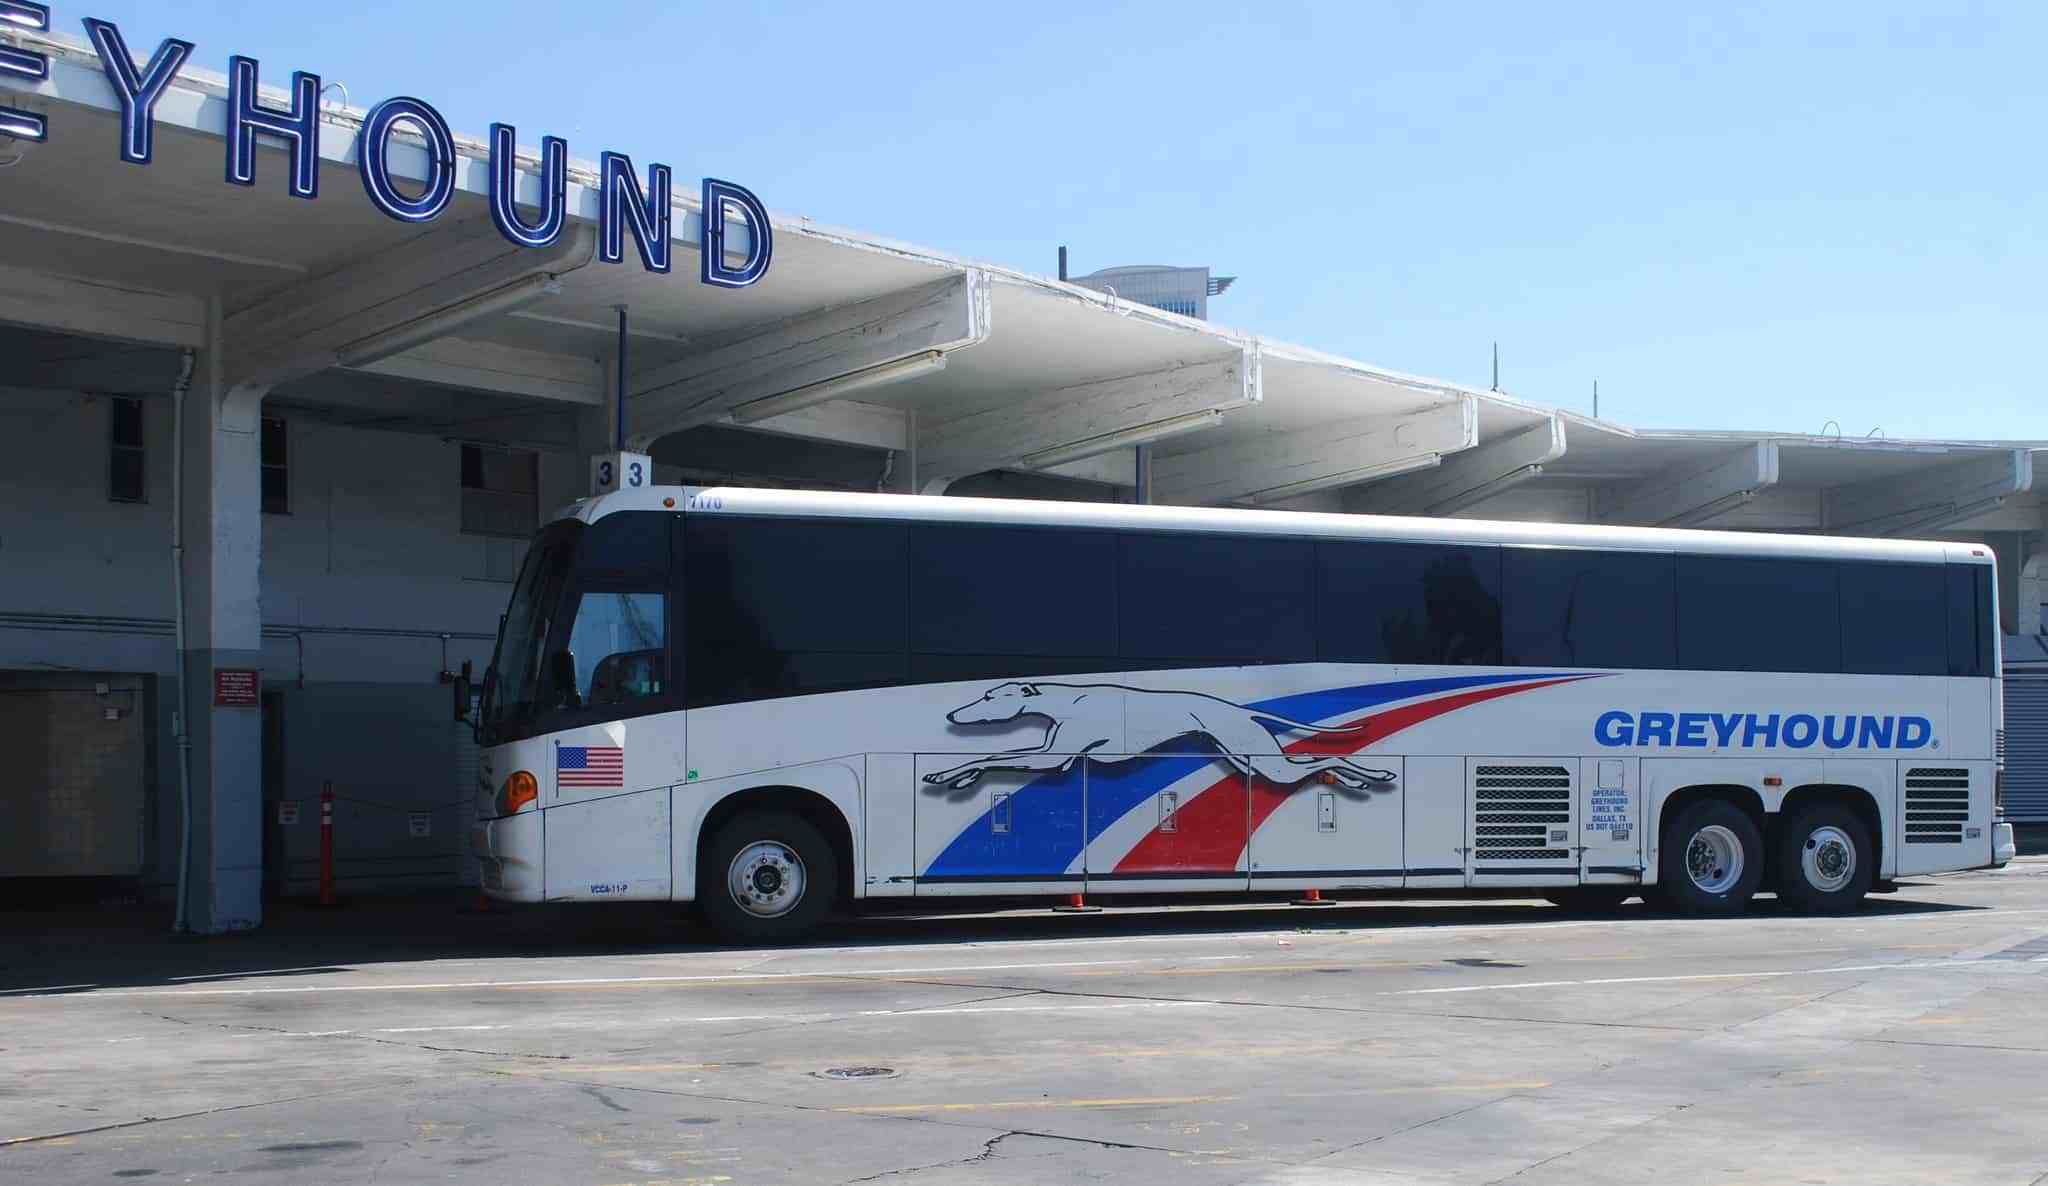 Letter to the editor re: Greyhound route closures in BC